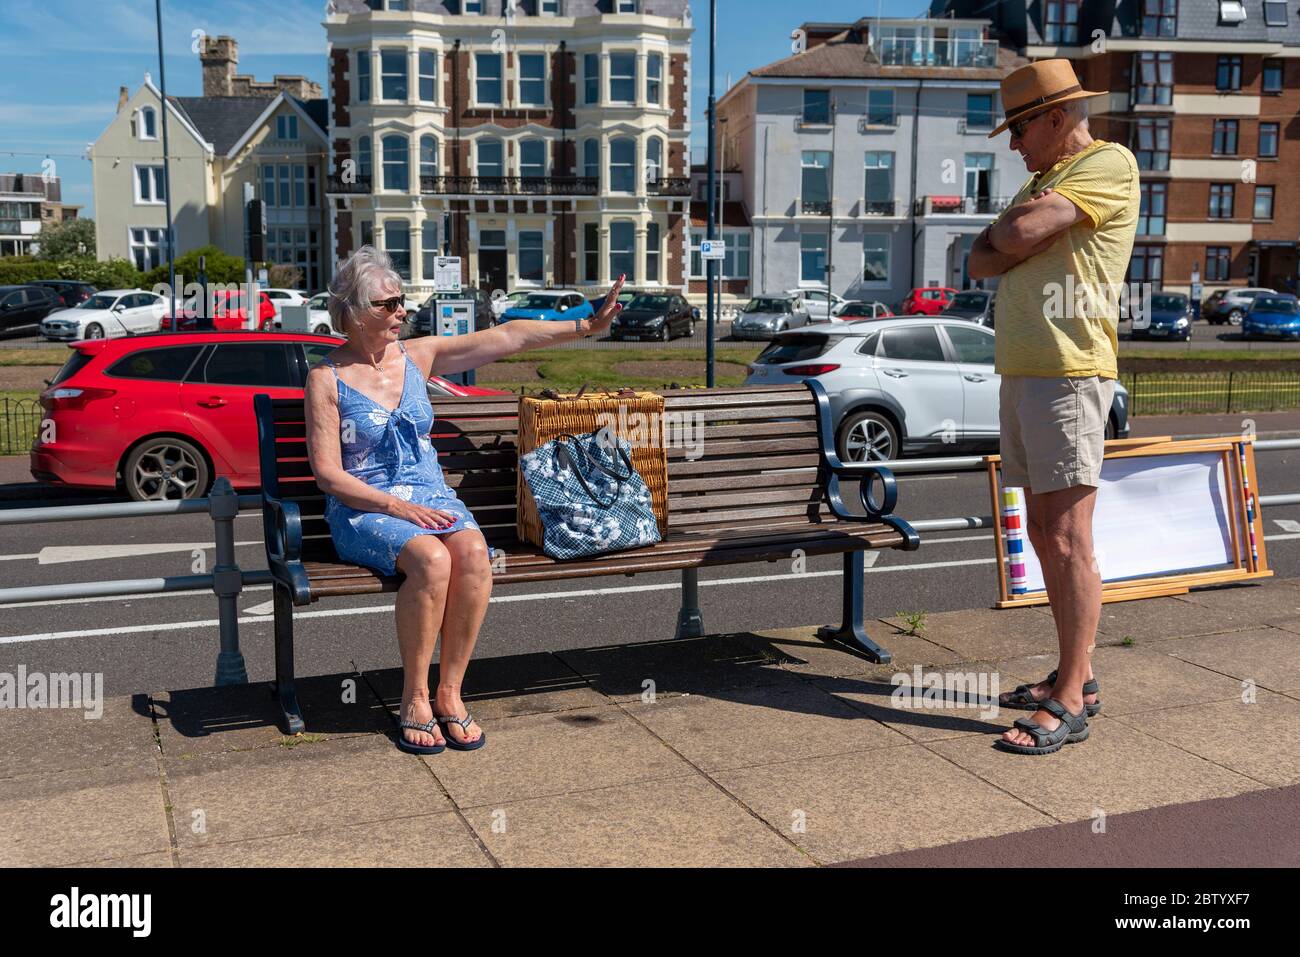 Southsea, Portsmouth, Southern England, UK. 2020. Woman sitting on a bench self distancing during the Corvid-19 outbreak. No space for the man to sit Stock Photo